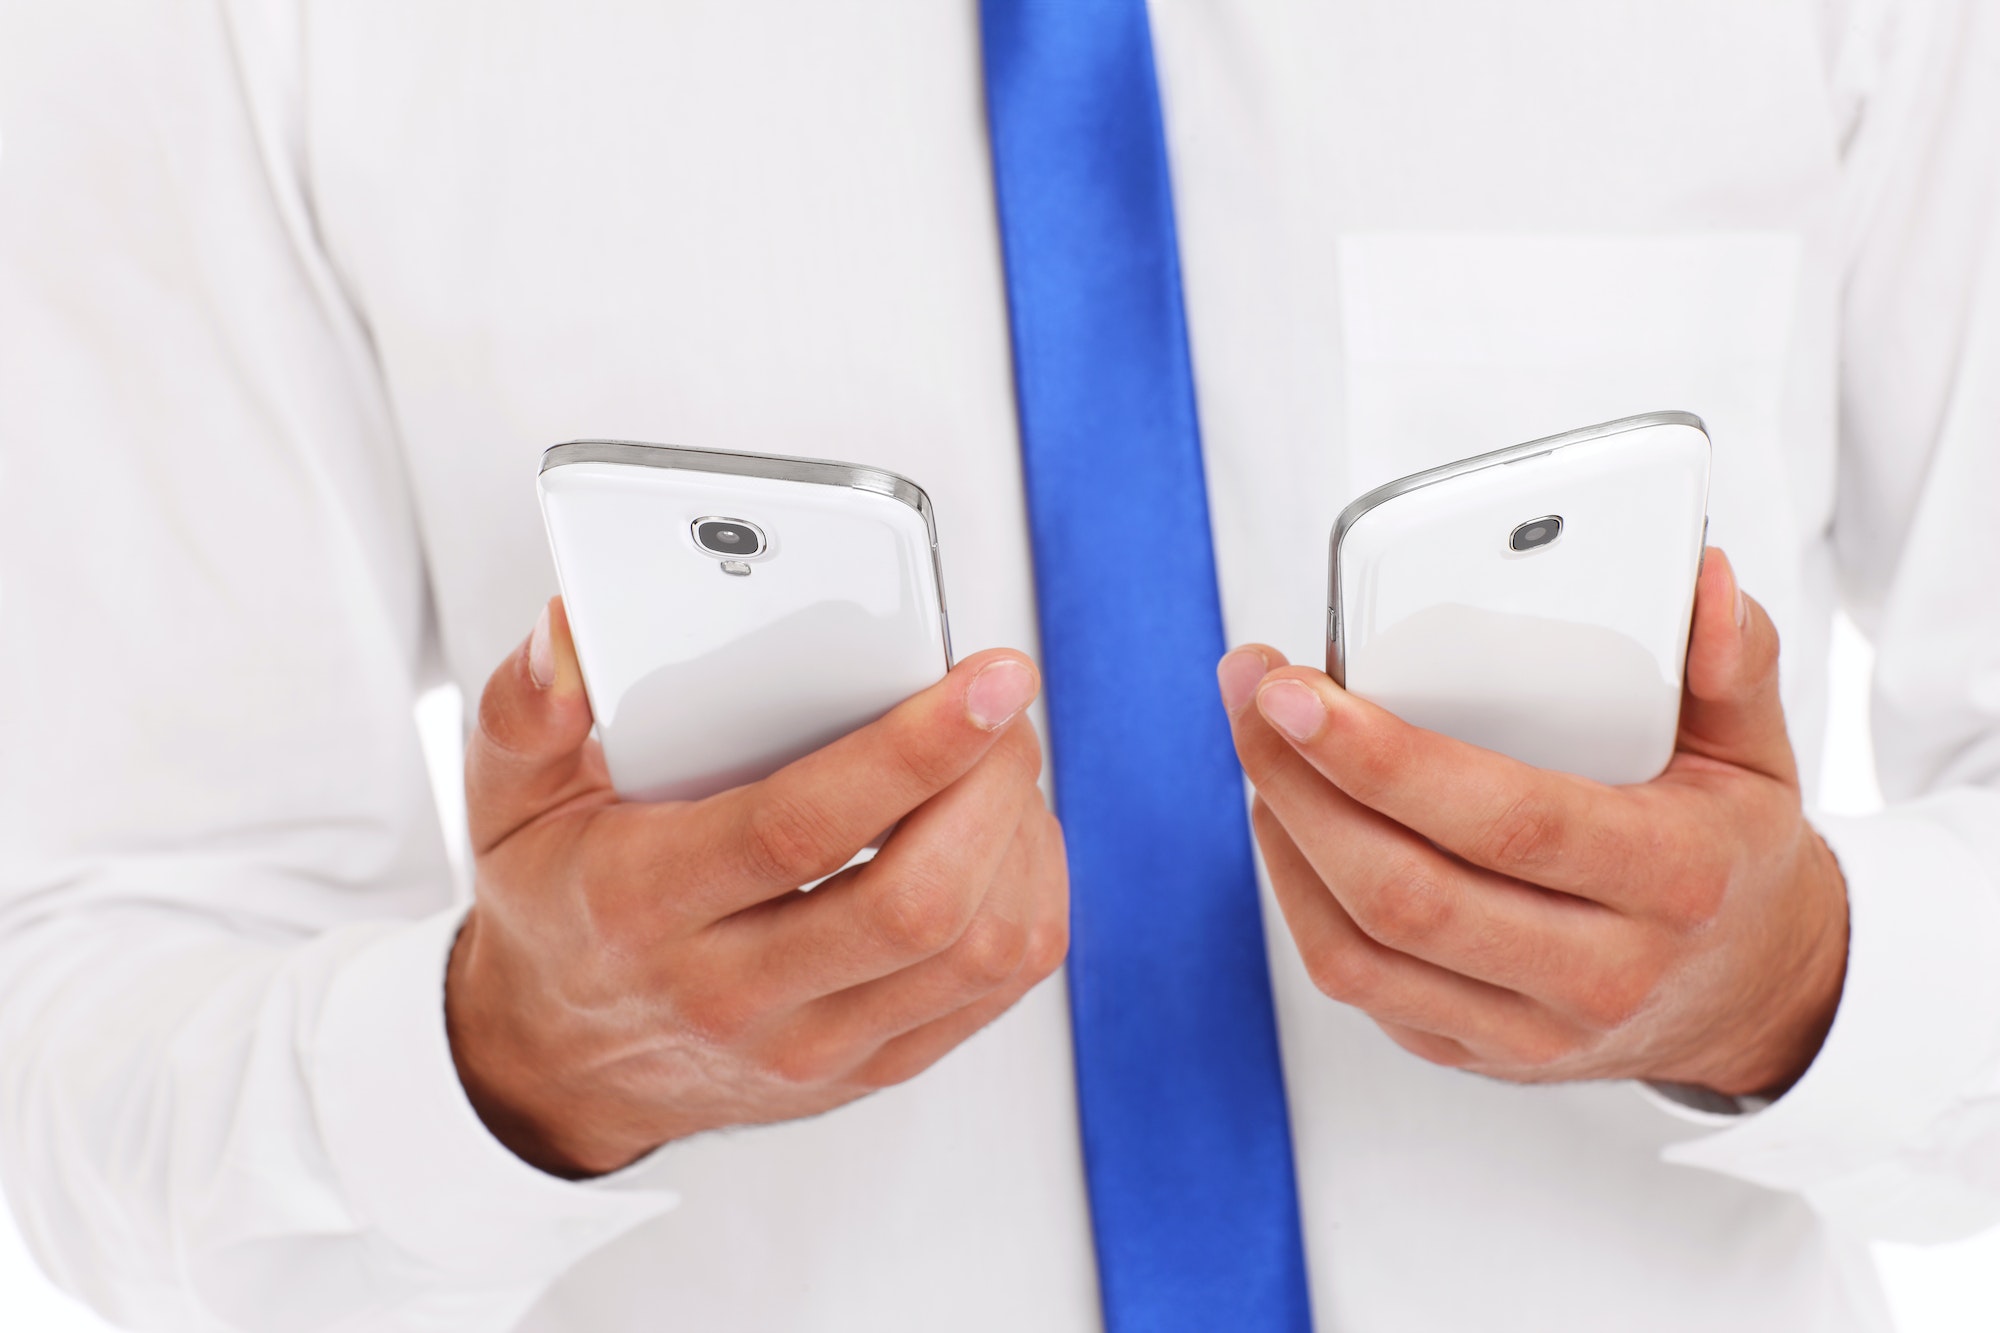 Midsection of businessman with two smarphones